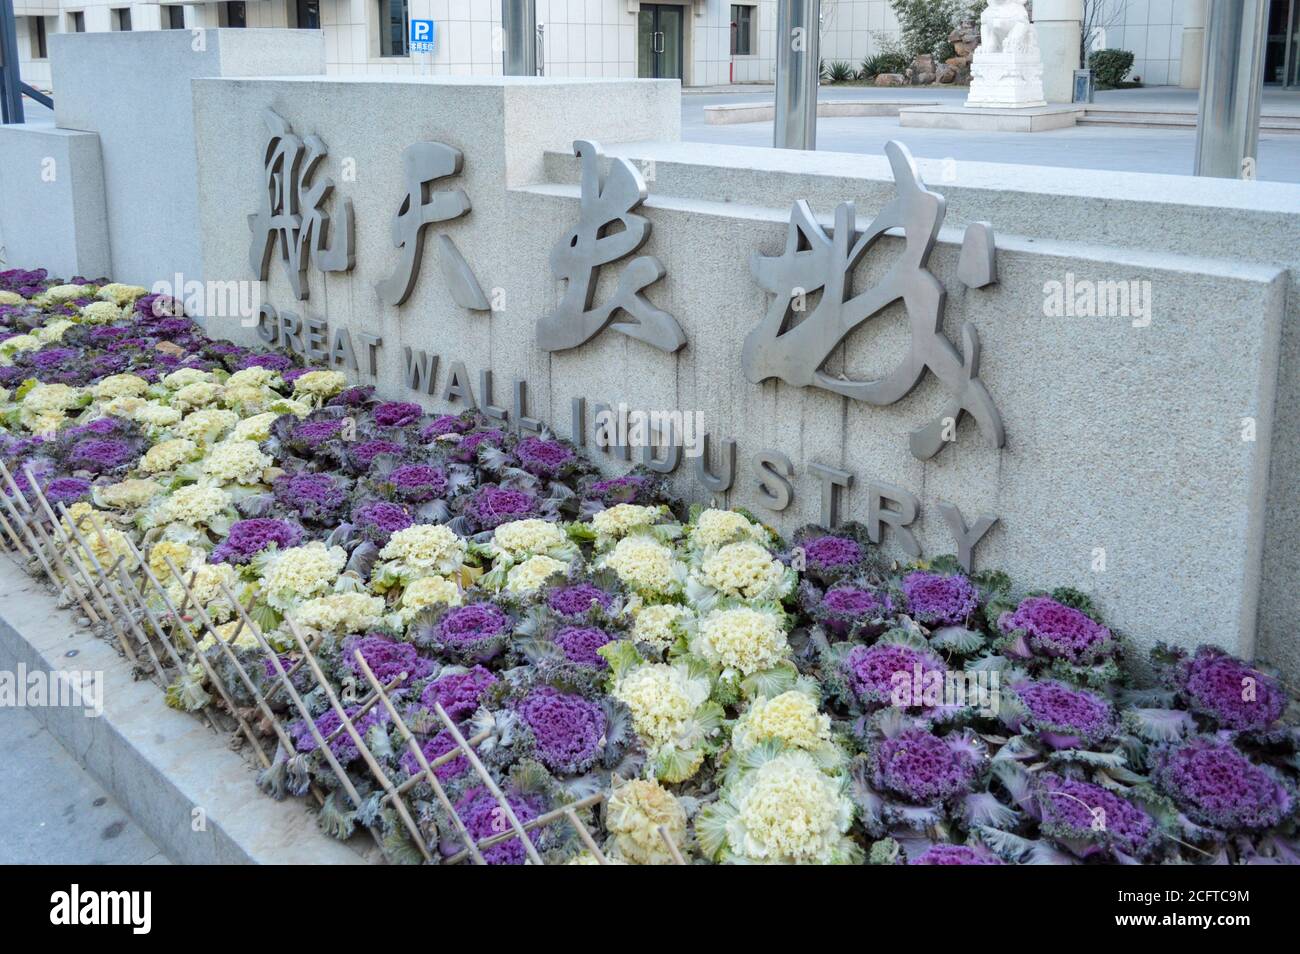 Beijing / China - February 2, 2014: China Great Wall Industry Corporation headquarters building in Xicheng District, Beijing, China. A subsidiary of C Stock Photo